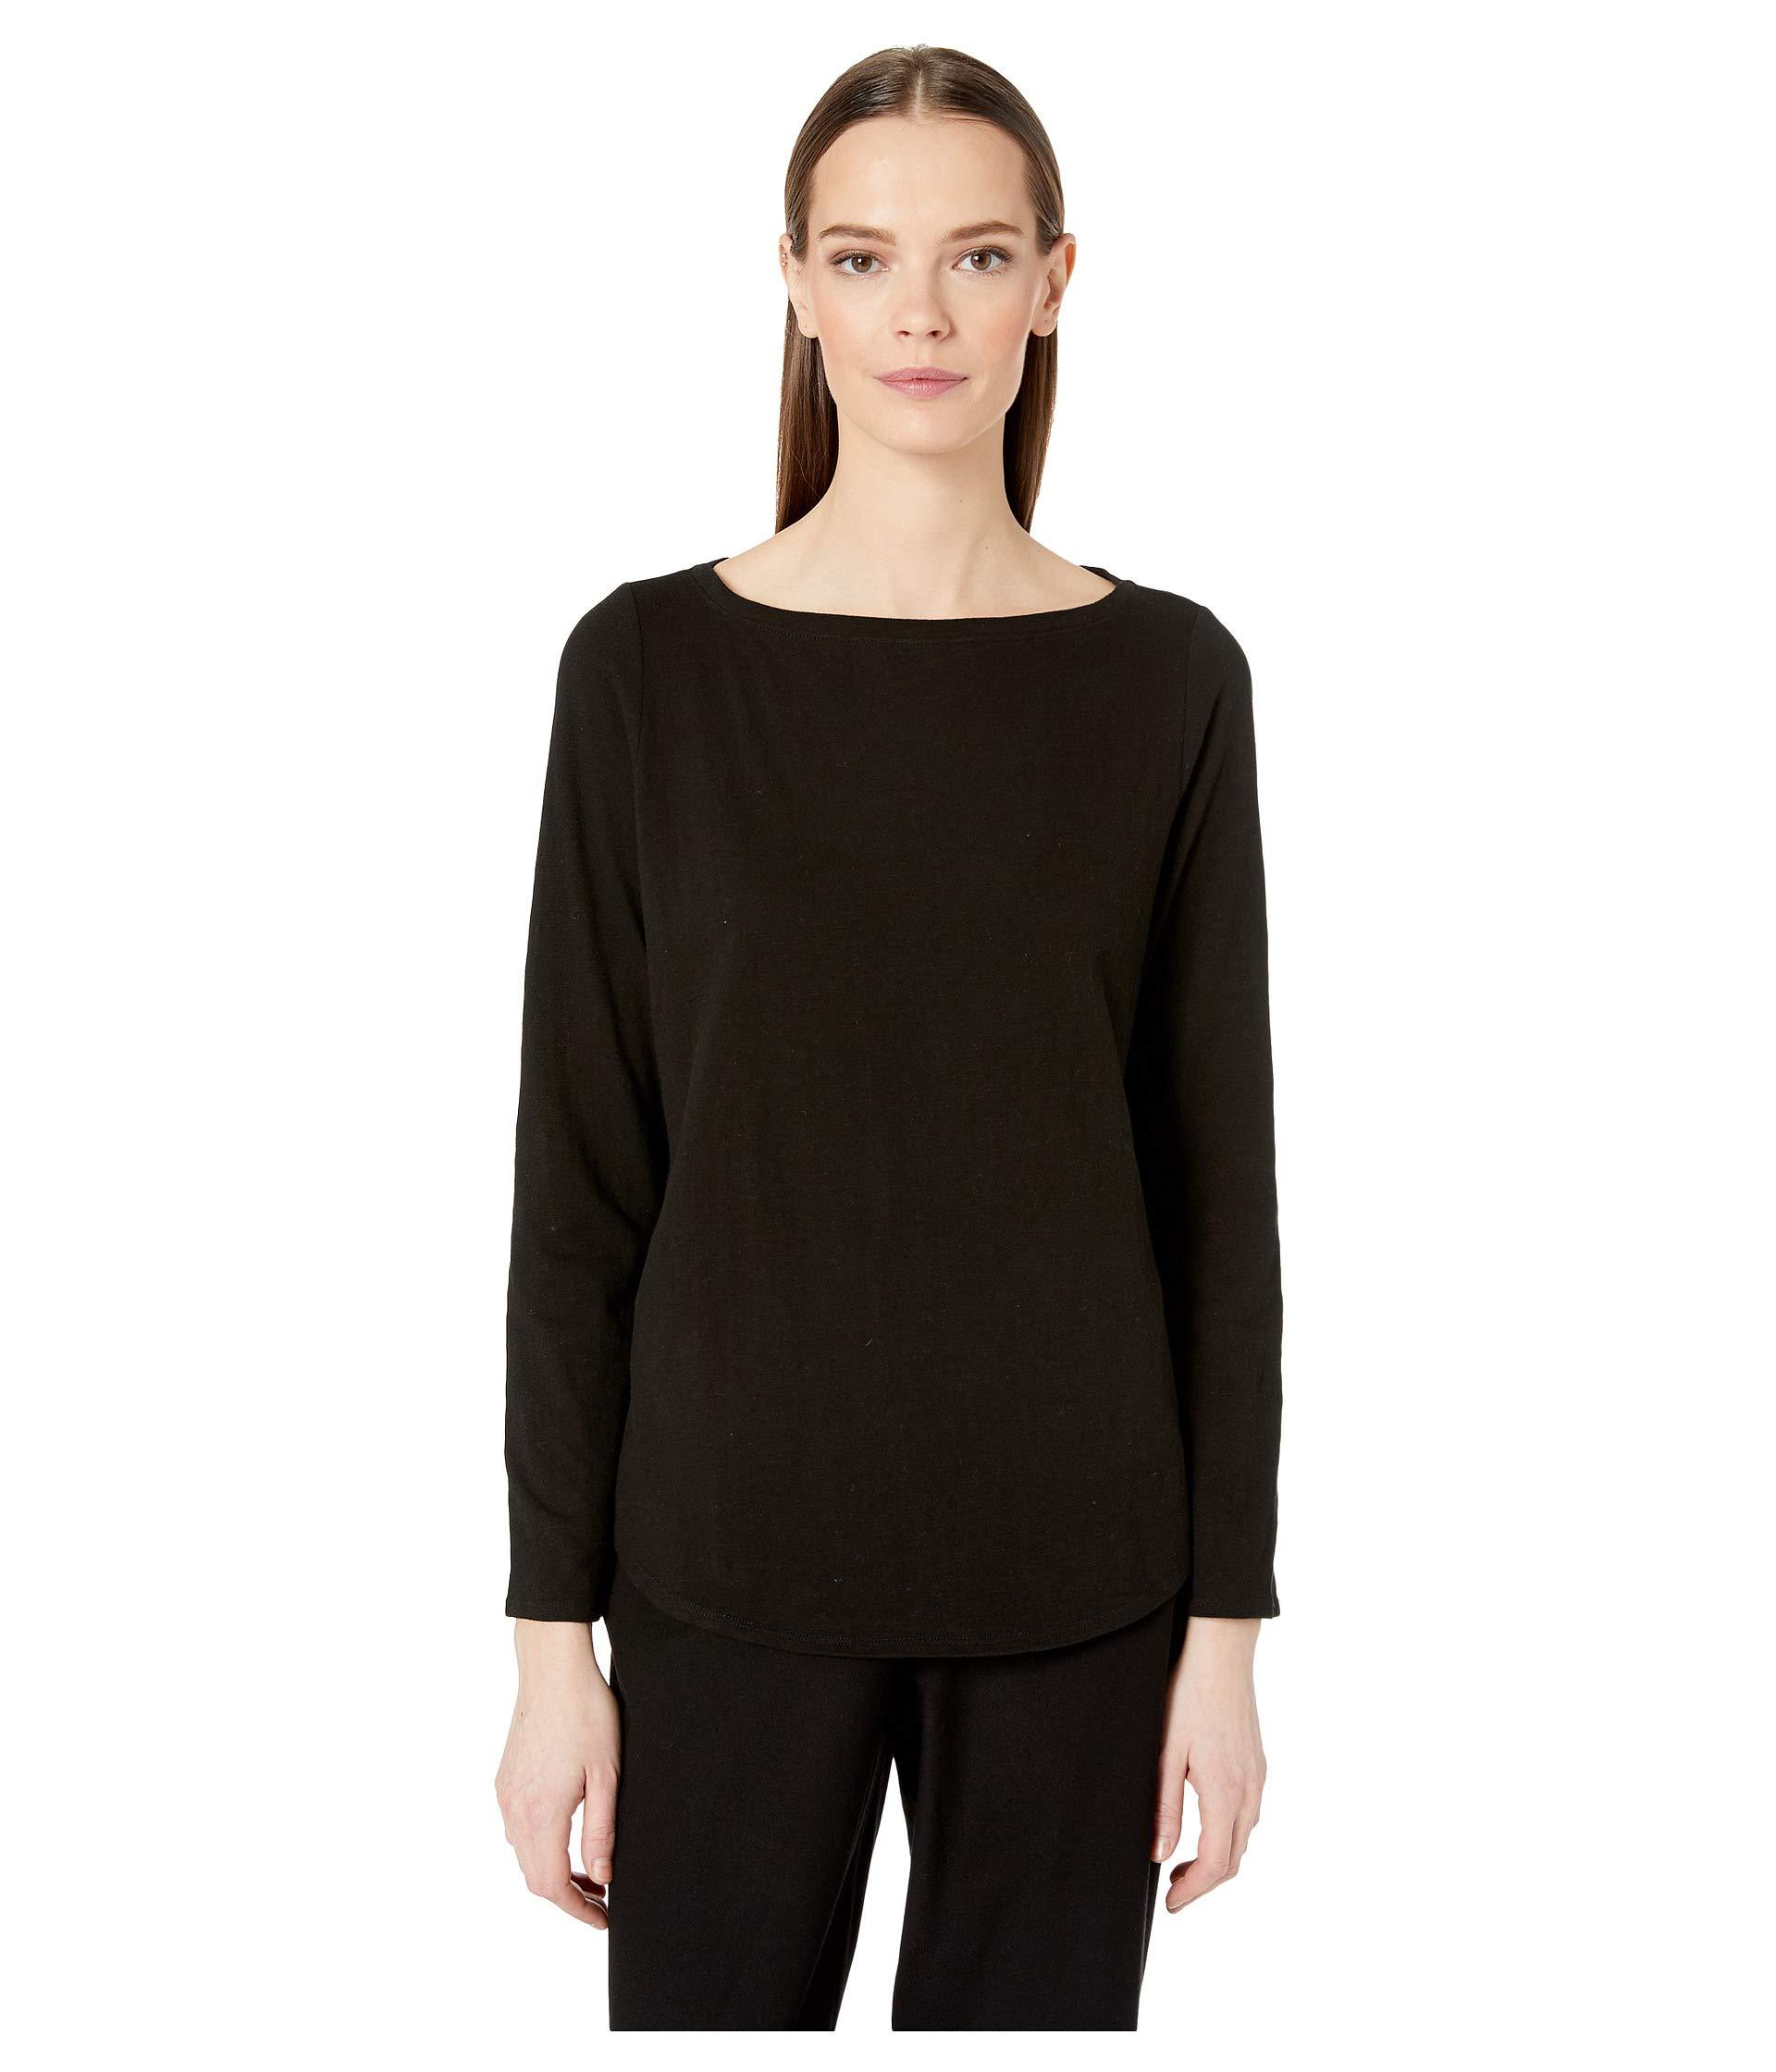 Eileen Fisher Synthetic Bateau Neck Tee in Black - Lyst